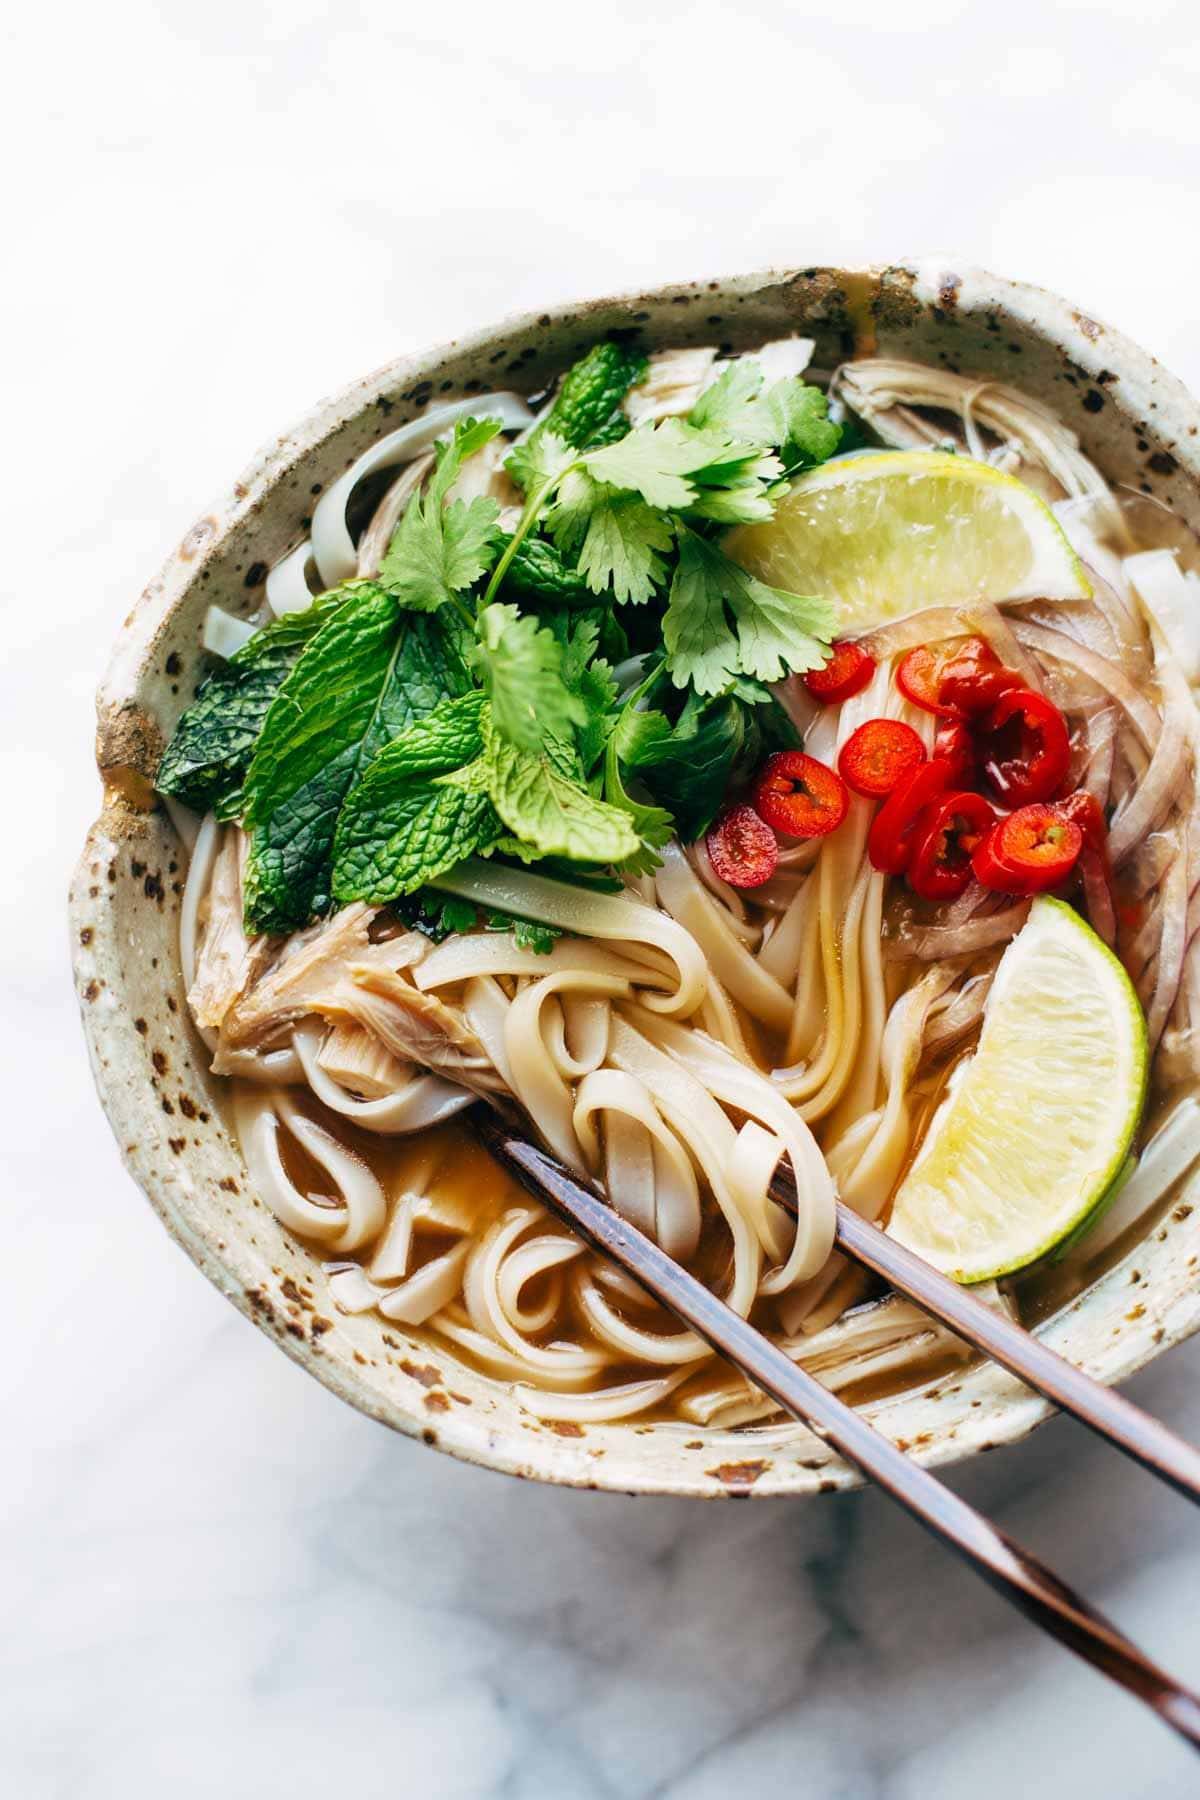 Turkey Pho recipe - LIGHT and so flavorful. All familiar ingredients that can be bought at a mainstream grocery store. Perfect for leftover turkey! | pinchofyum.com